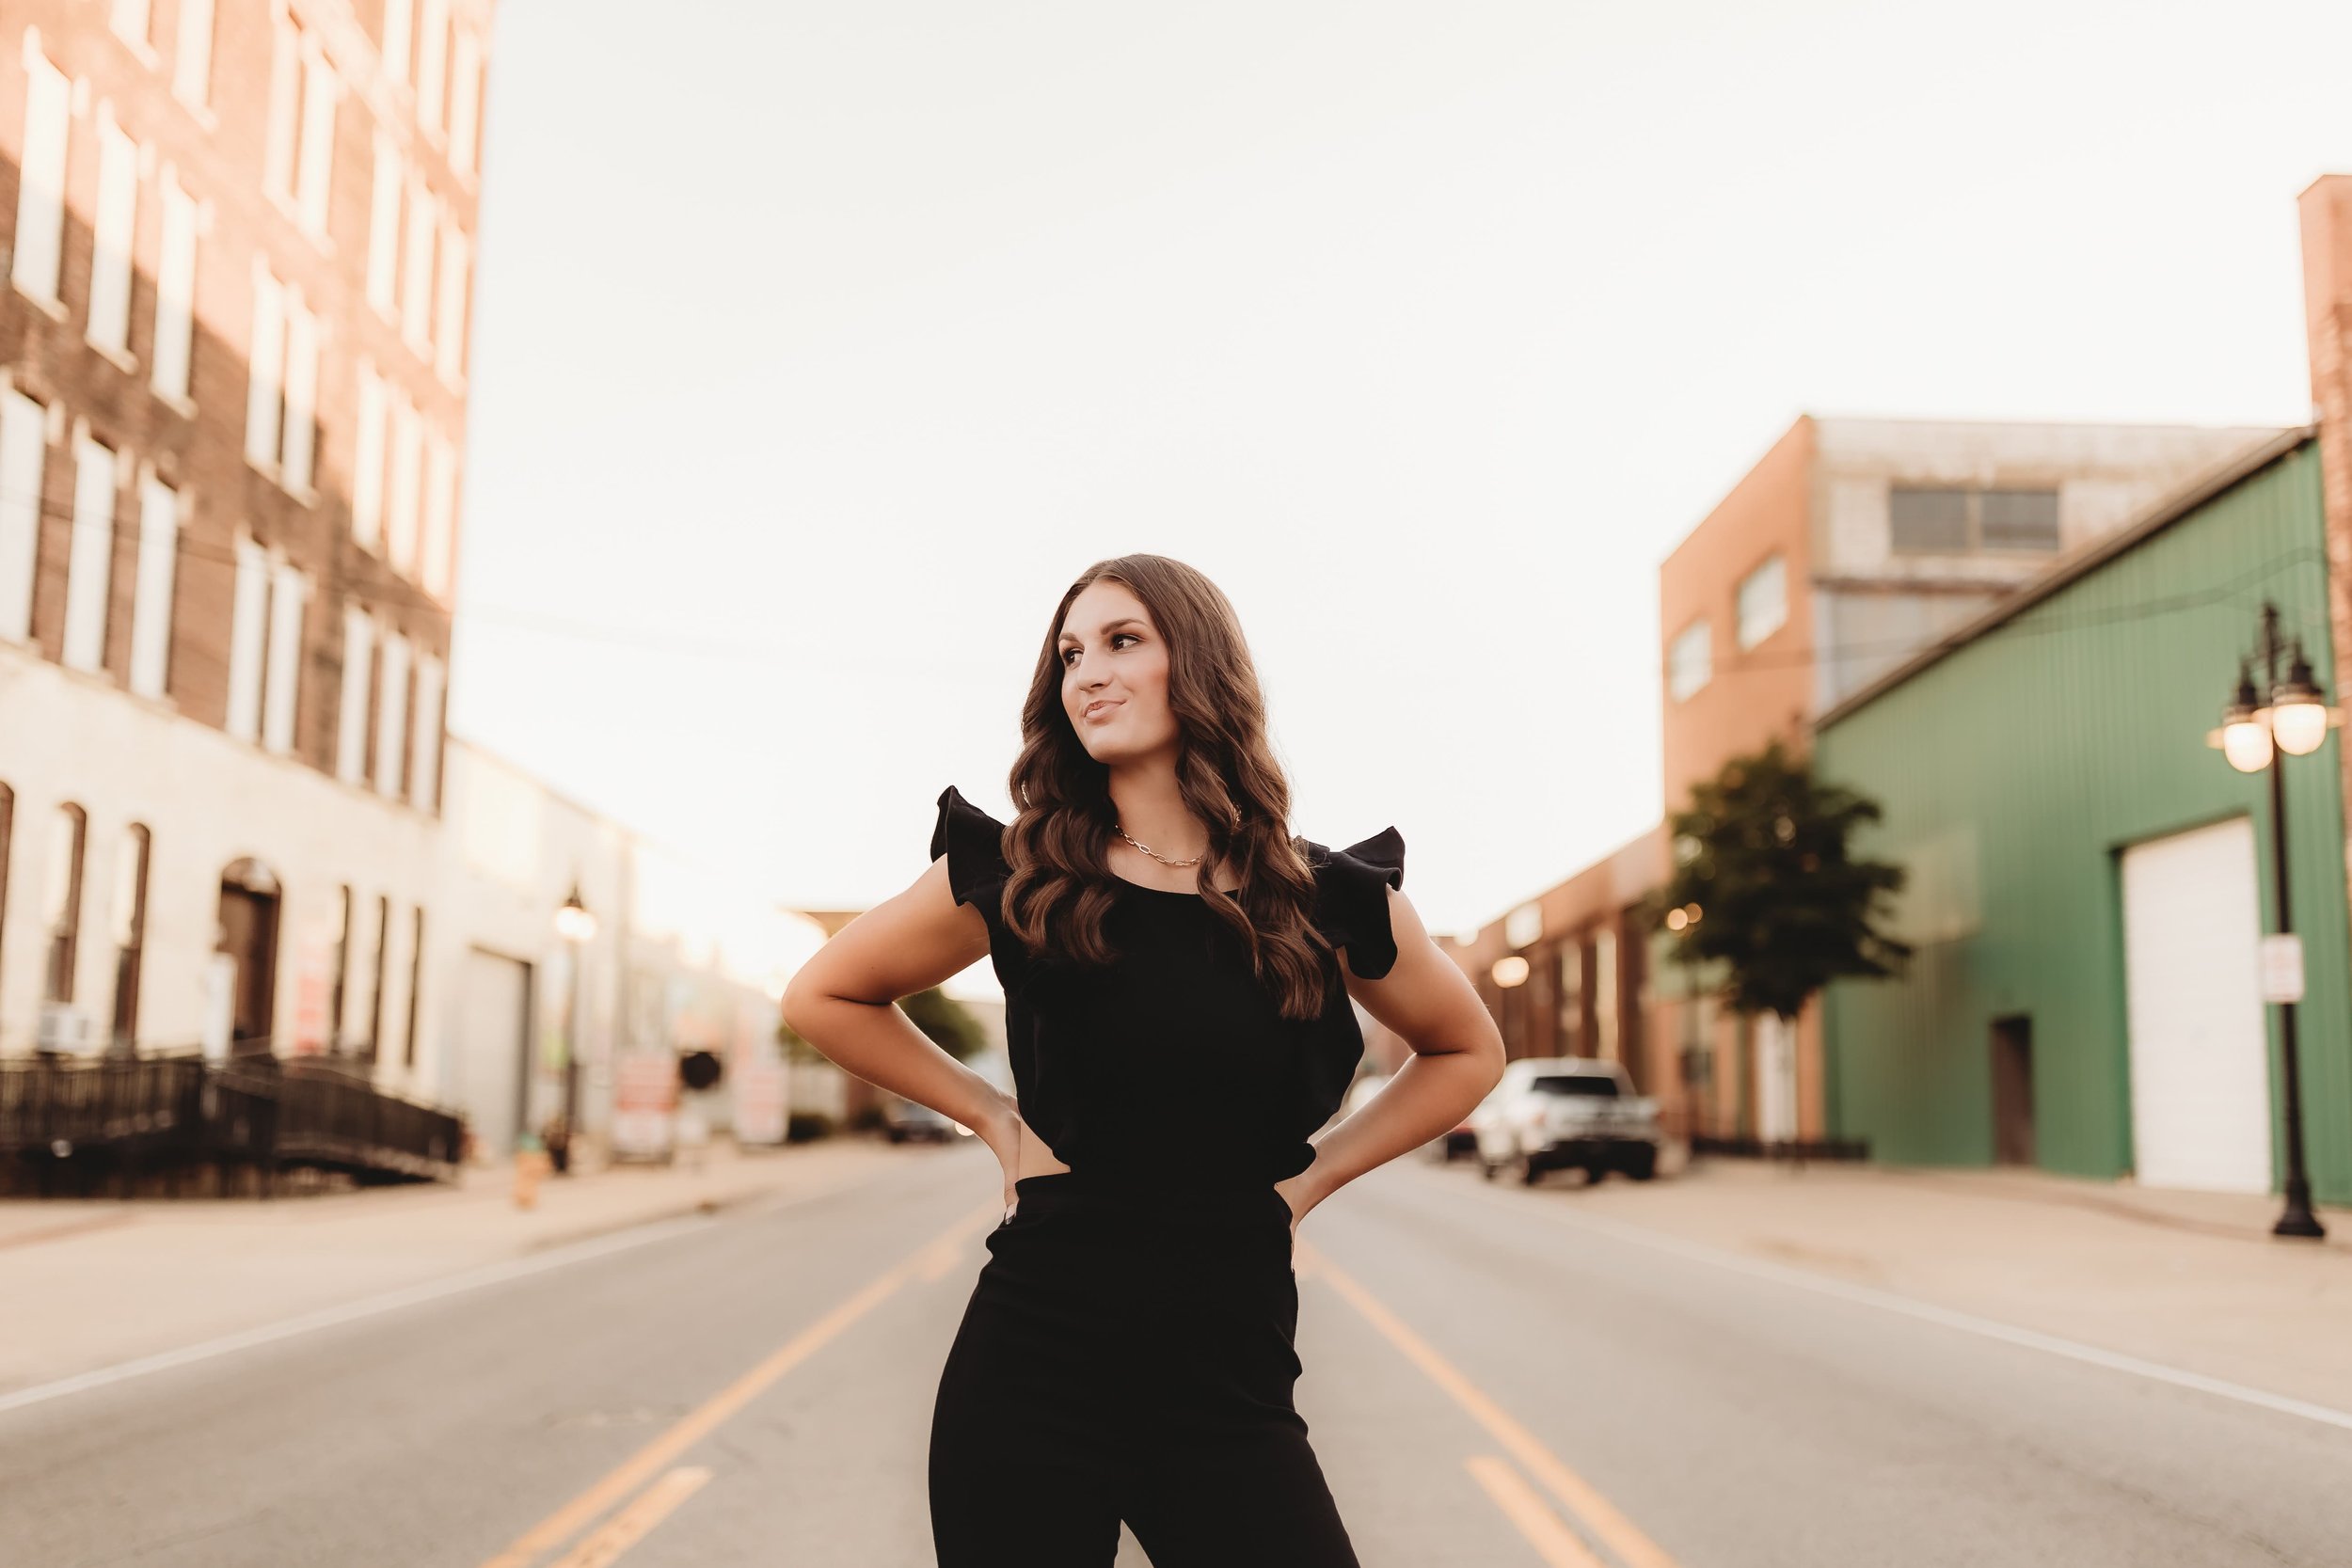  High school senior stands in the middle of an unbusy street in small town illinois with her hands on her hips and looks off into the distance during a photoshoot for senior picture ideas 